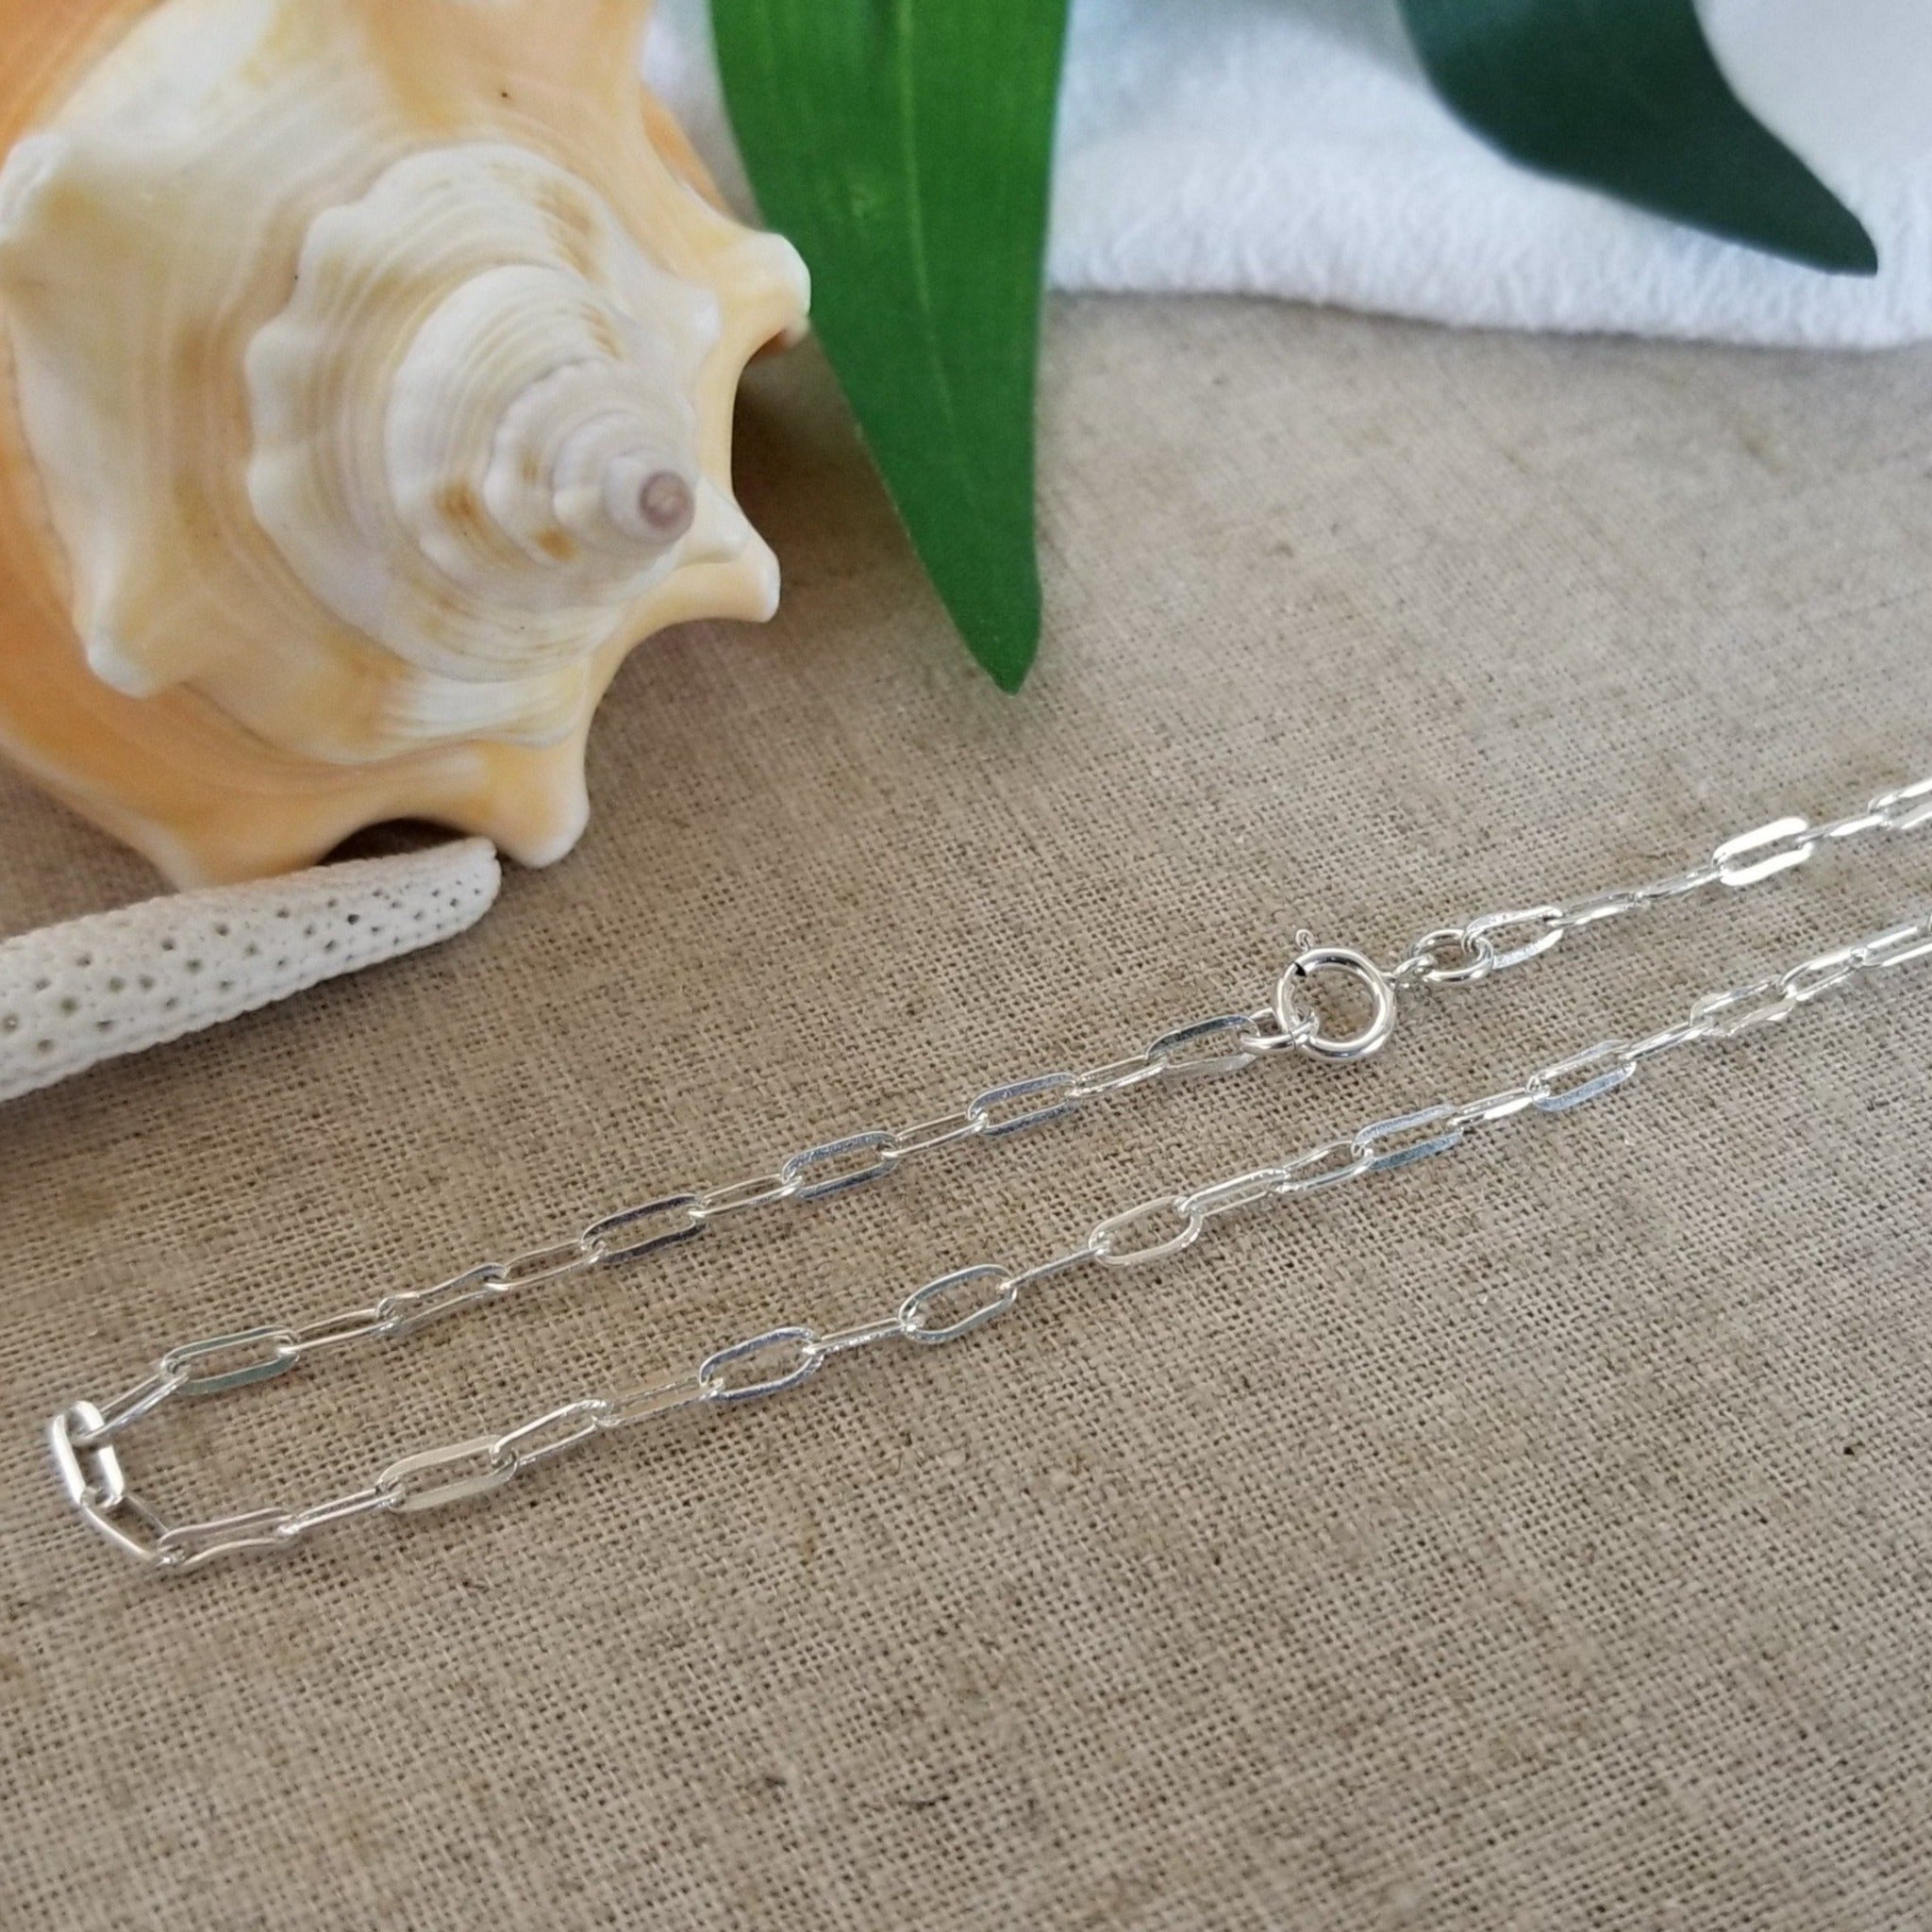 Chain Link Paperclip Anklet - Sterling Silver